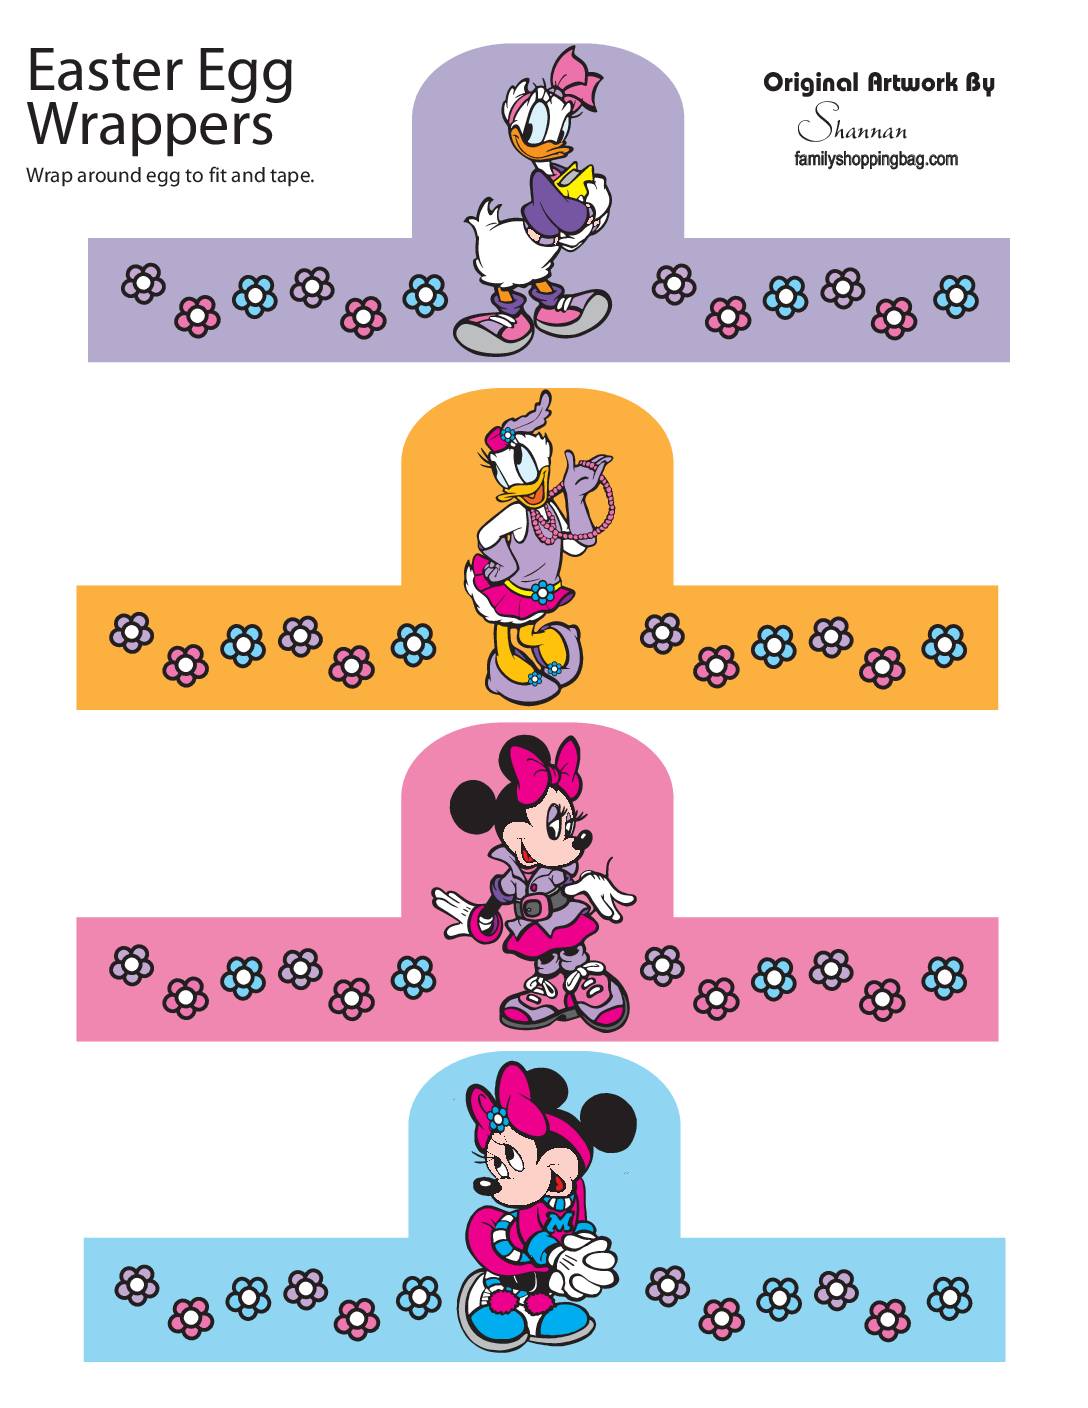 Minnie Mouse Party Decorations